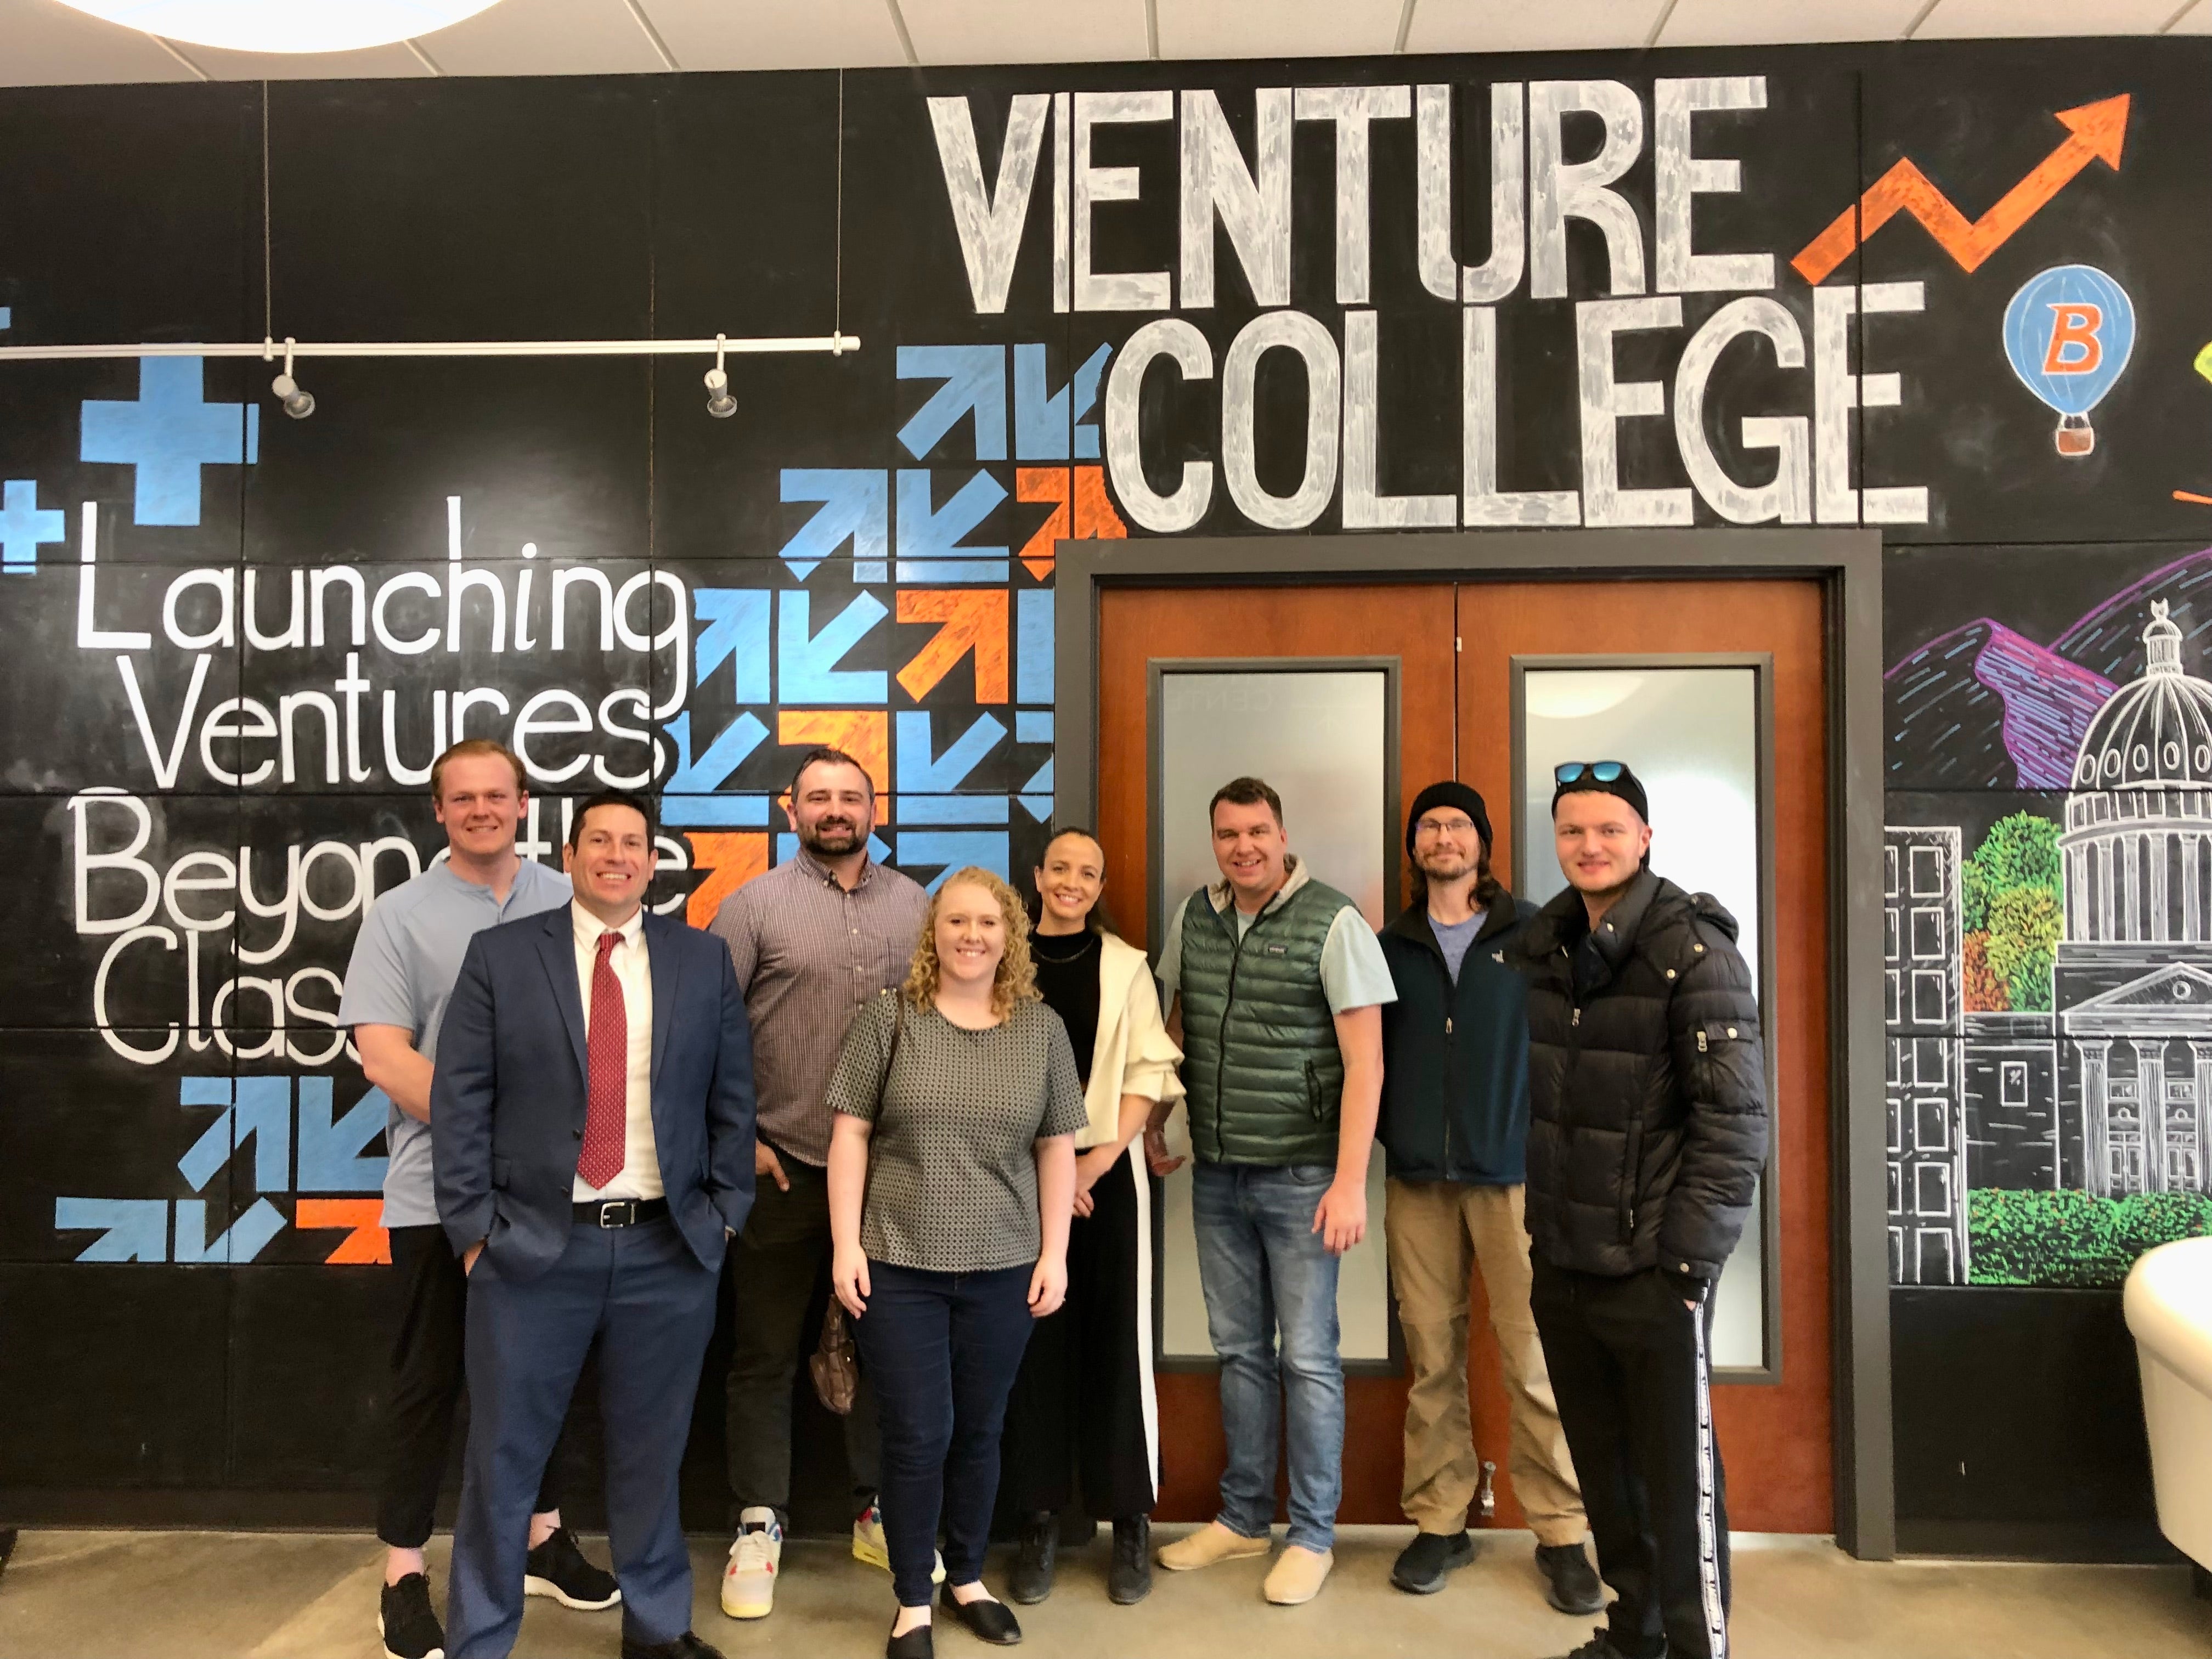 A group of Venture College Incubator participants stand in front of the Venture College mural in BoDo.